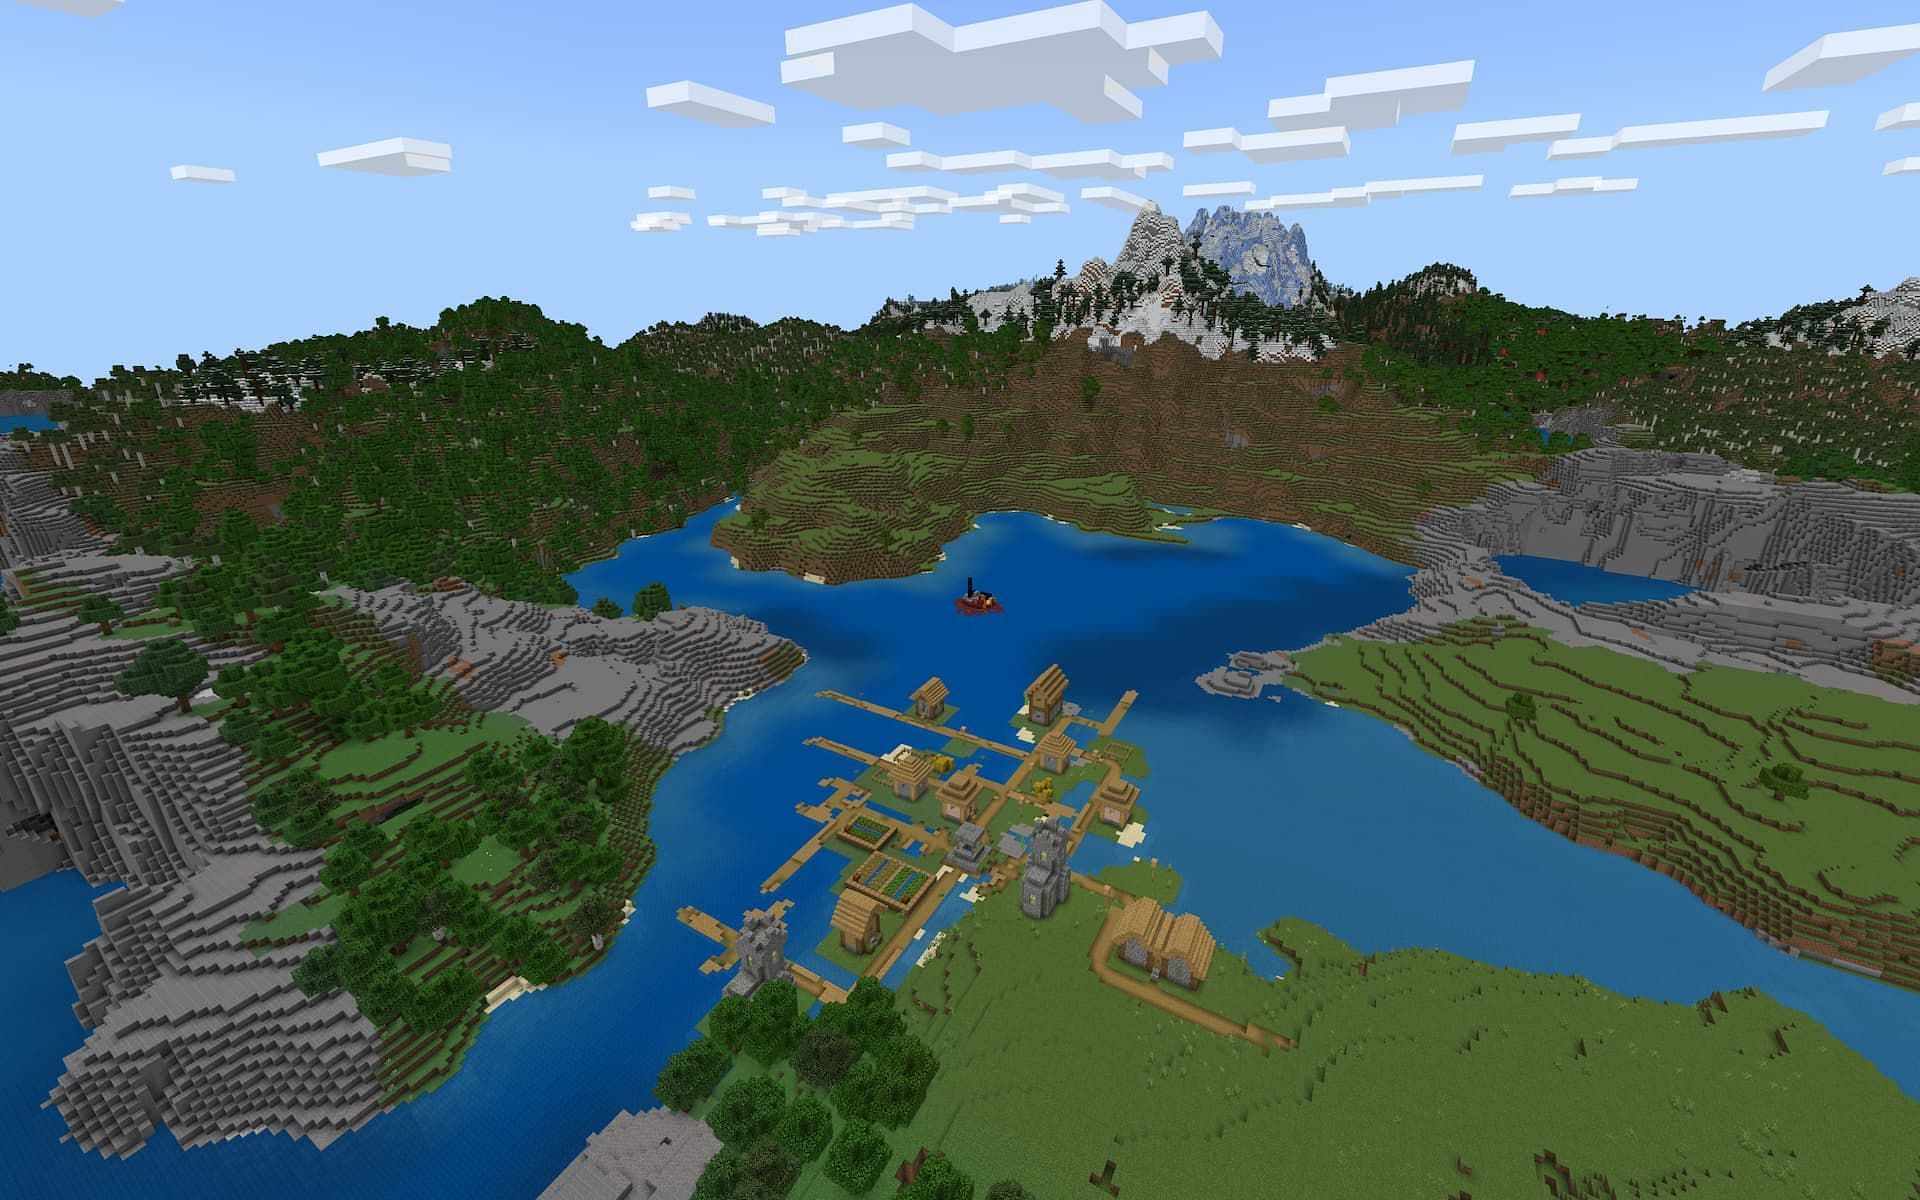 Enjoy the breathtaking view in this seed (Image via Mojang)